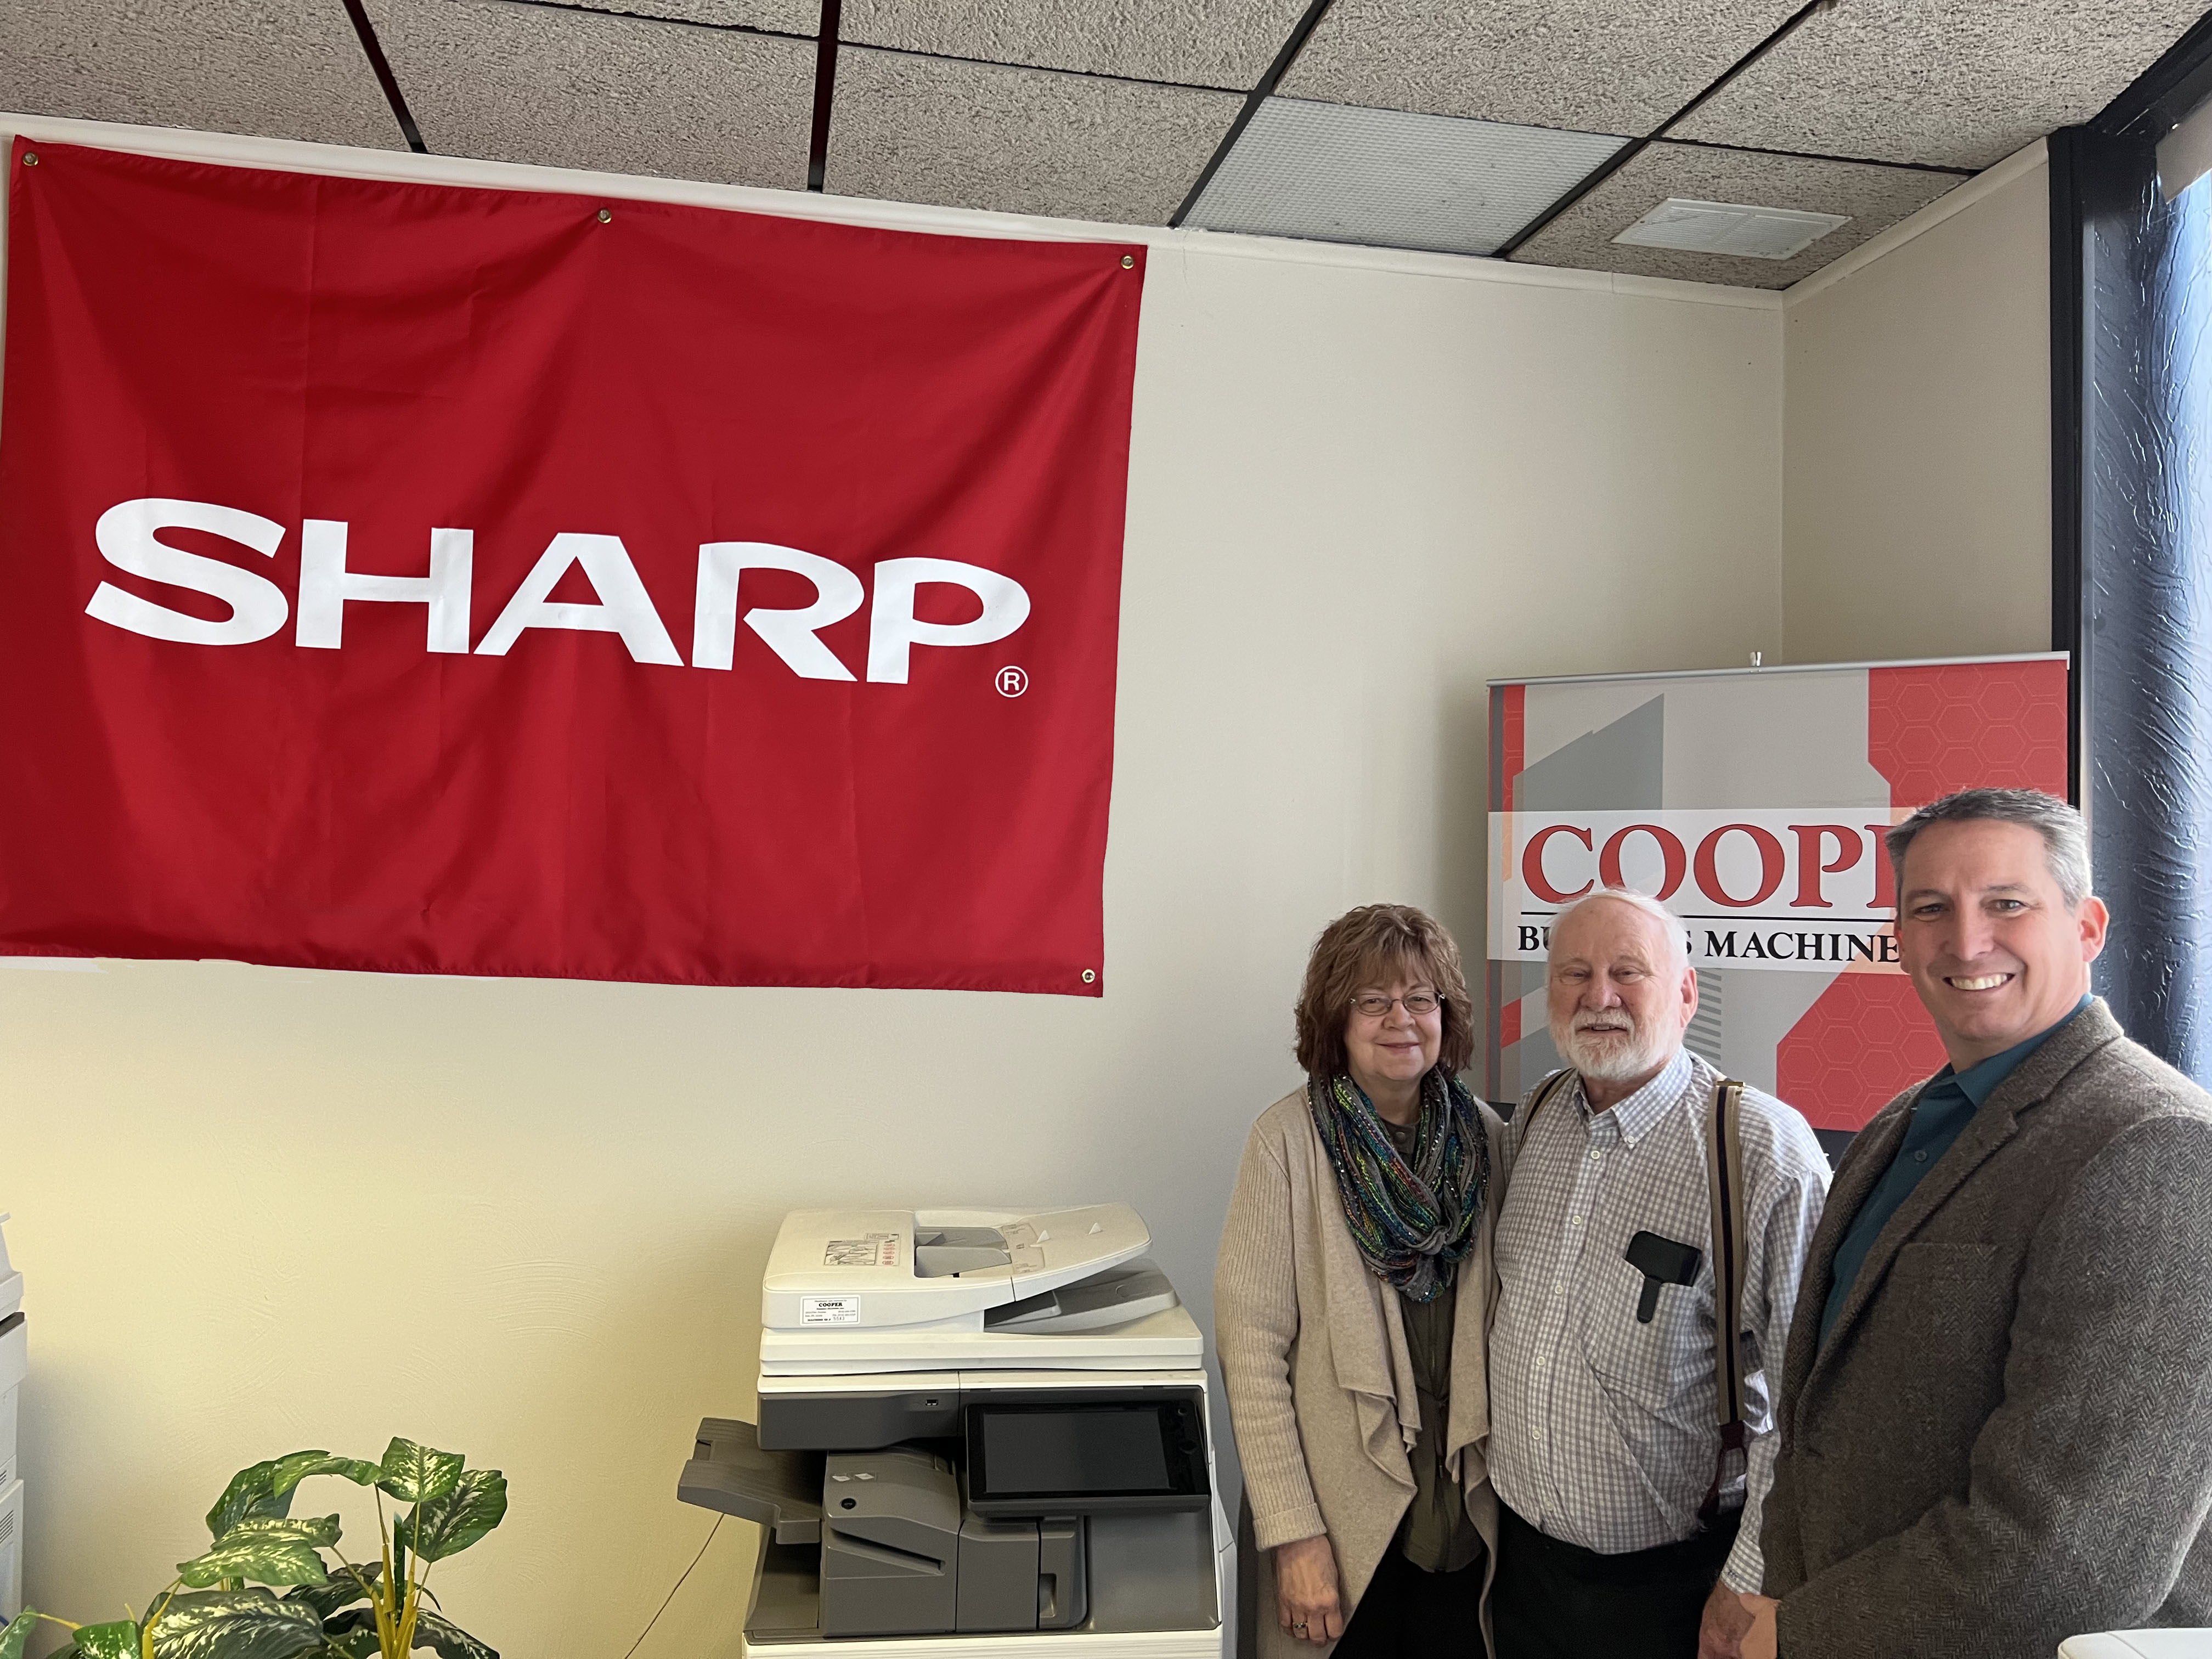 DBB Welcomes Cooper Business Machines to the DBB Family!